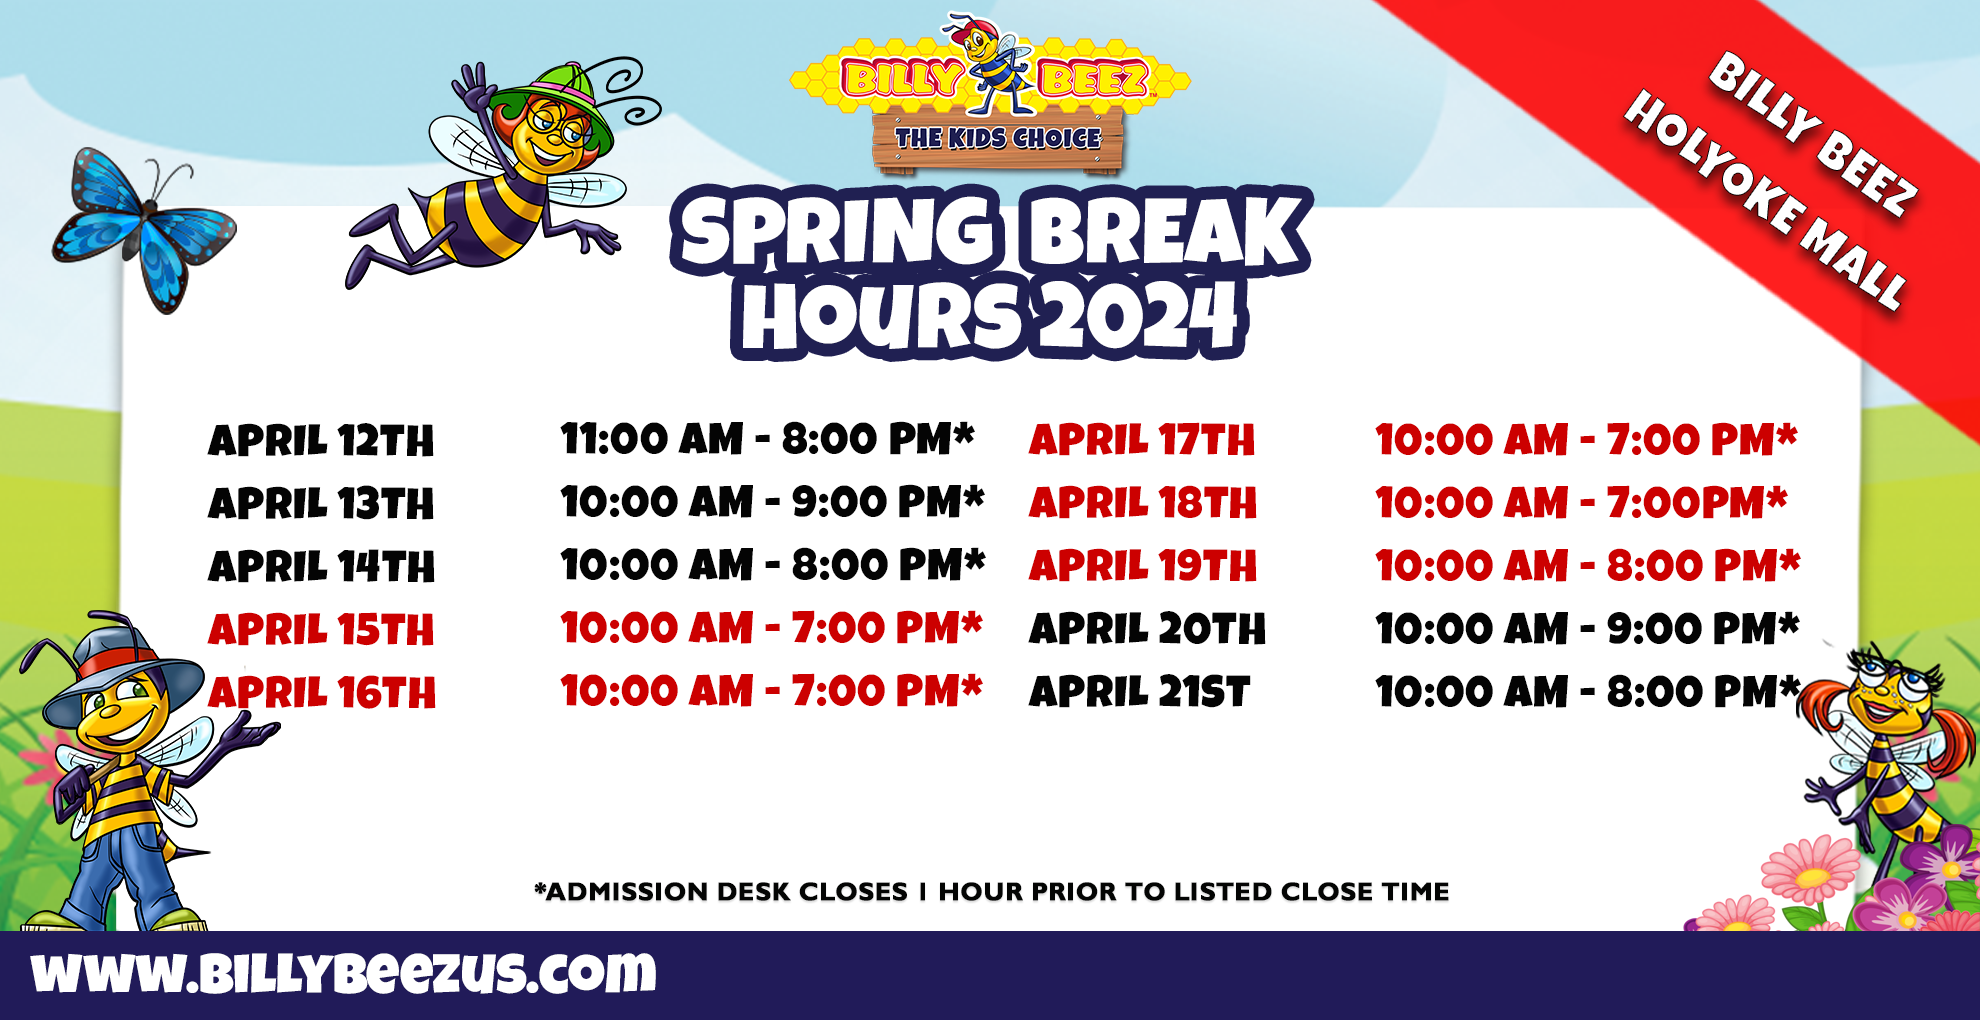 Billy Beez The Kids Choice Billy Beez Holyoke Mall Spring Break Hours 2024 April 12th 11:00am-8:00pm* April 13th 10:00am-9:00pm* April 14th 10:00am-8:00pm* April 15th 10:00am-7:00pm* April 16th 10:00am-7:00pm* April 17th 10:00am-7:00pm* April 18th 10:00am-7:00pm* April 19th 10:00am-8:00pm* April 20th 10:00am-9:00pm* April 21st 10:00am-8:00pm* *Admission desk closes 1 hour prior to listed close time www.billybeezus.com